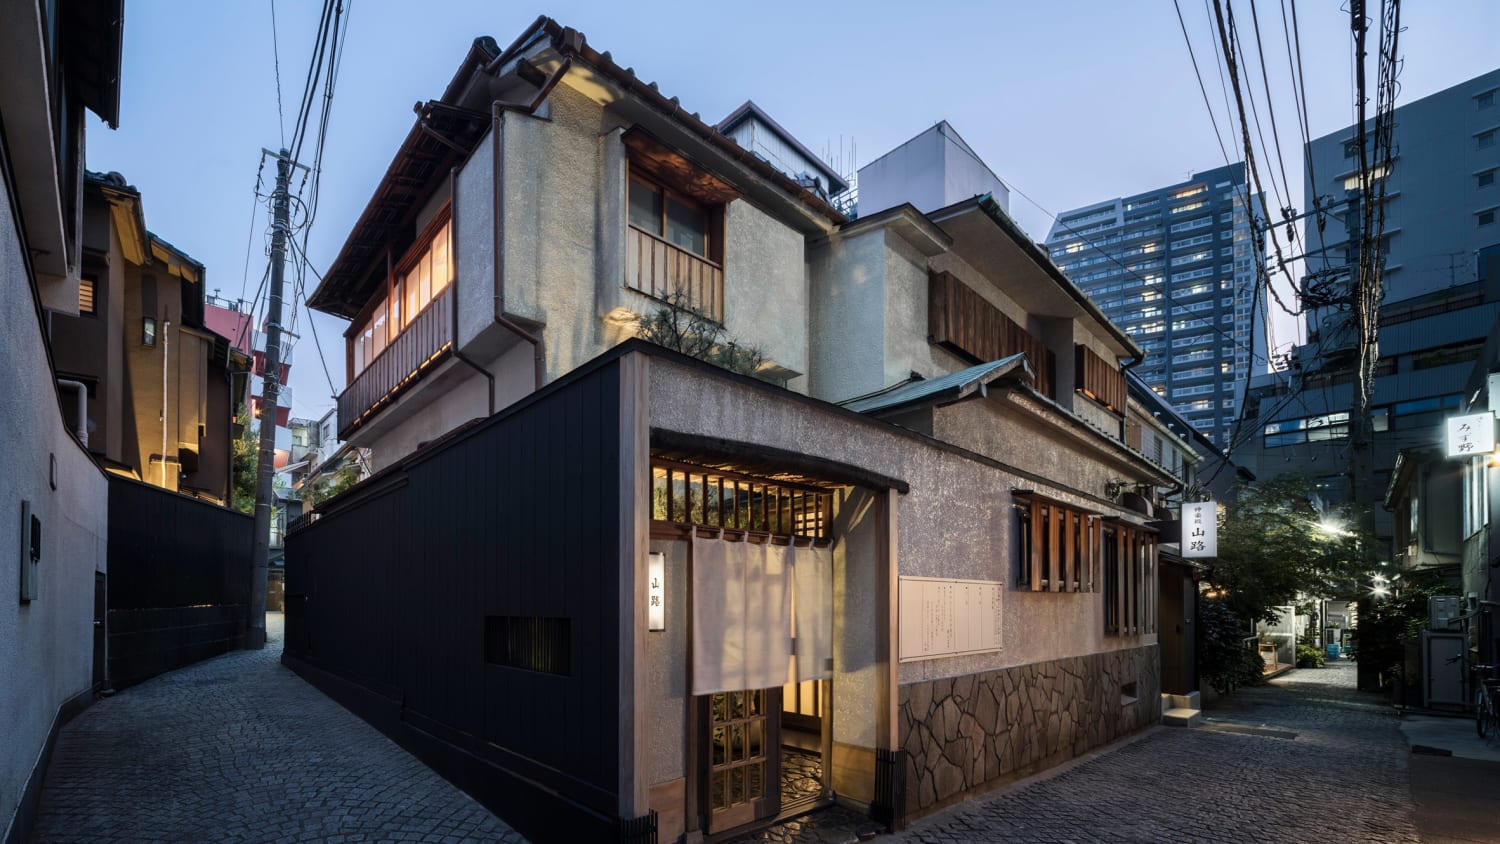 One-room hotel Trunk House includes Tokyo's tiniest disco